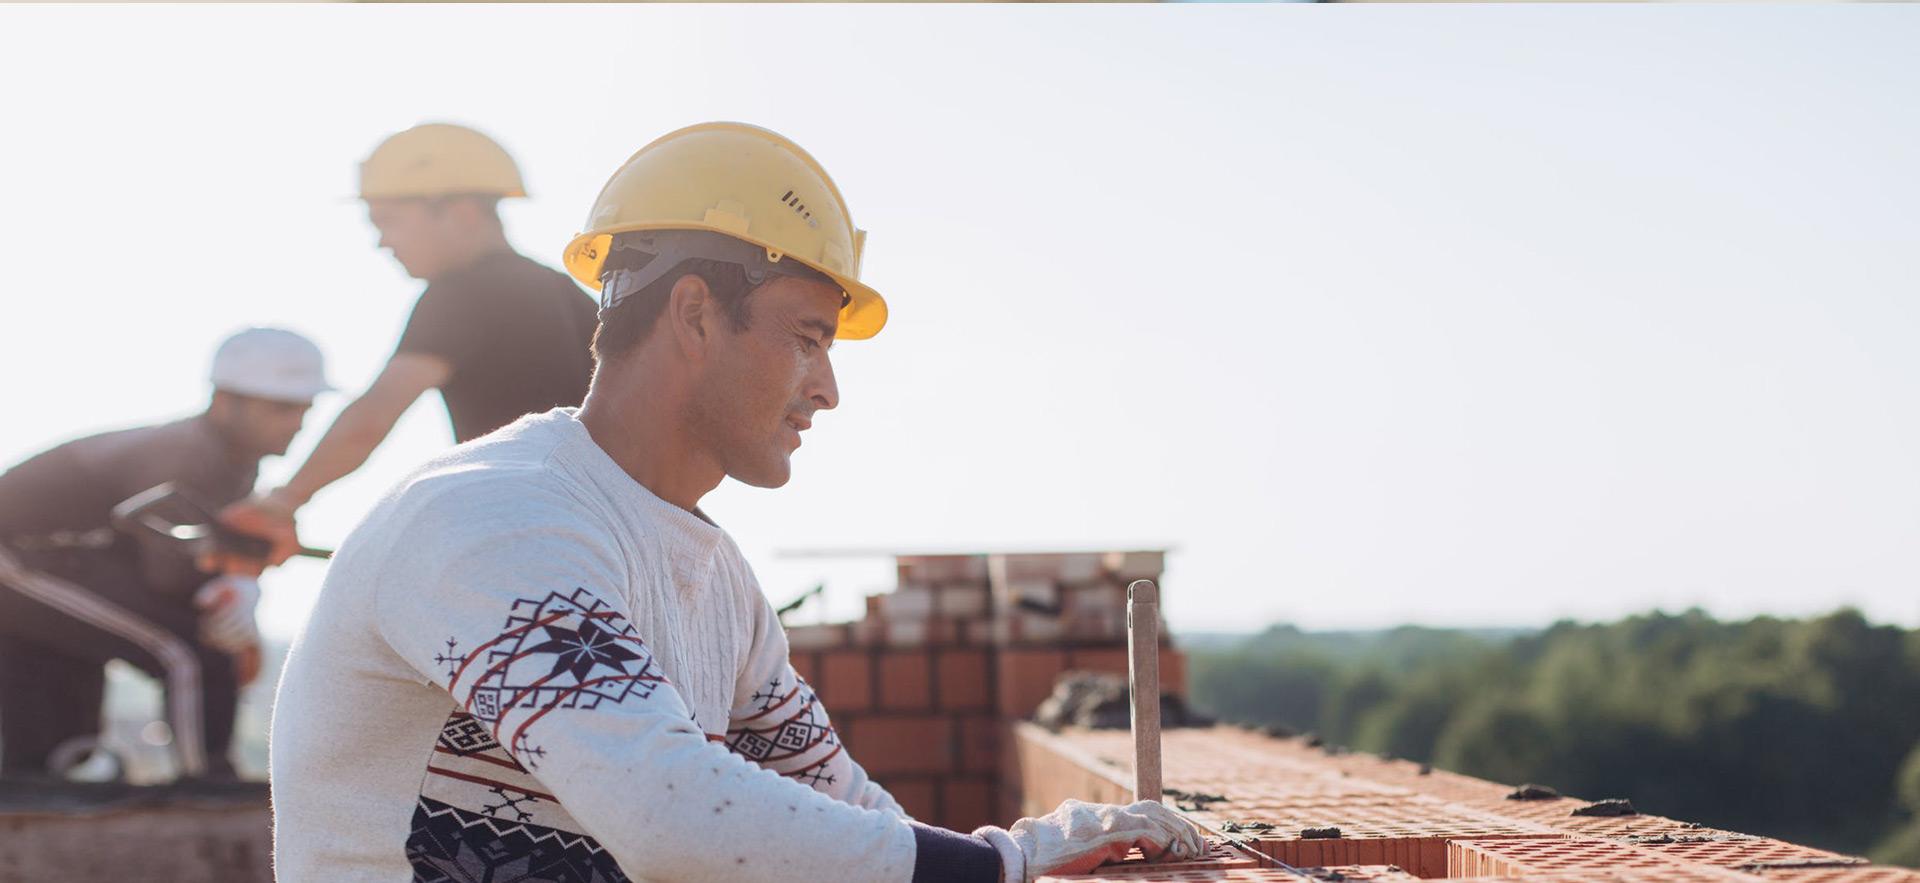 Male working on a roof laying bricks.